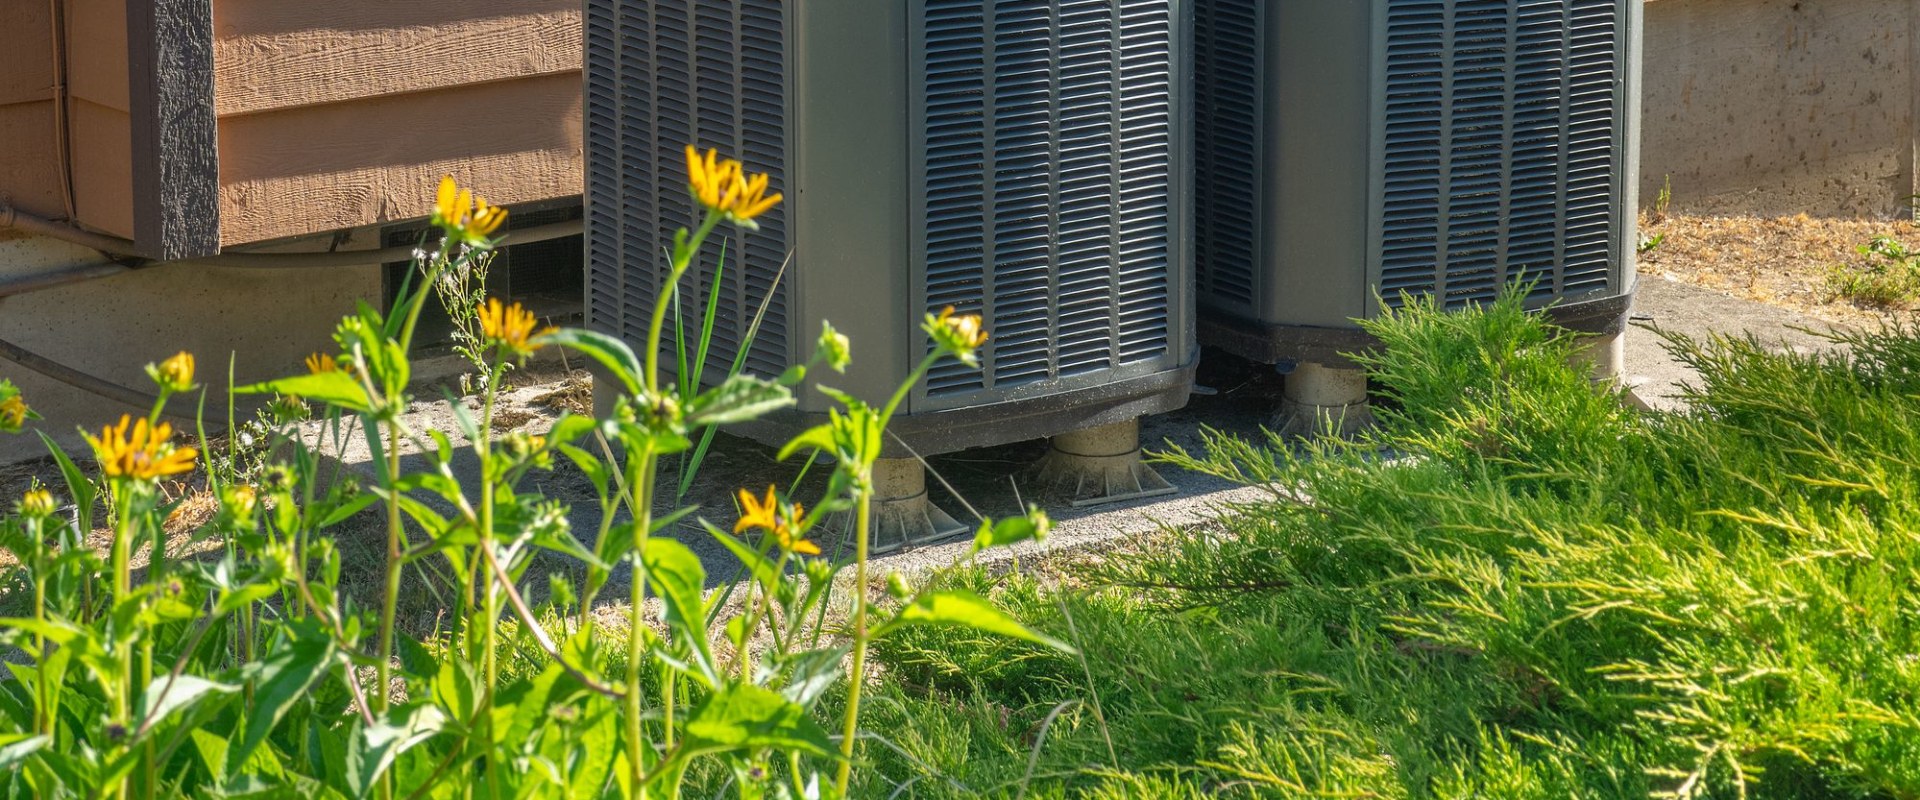 What is the best type of hvac system?